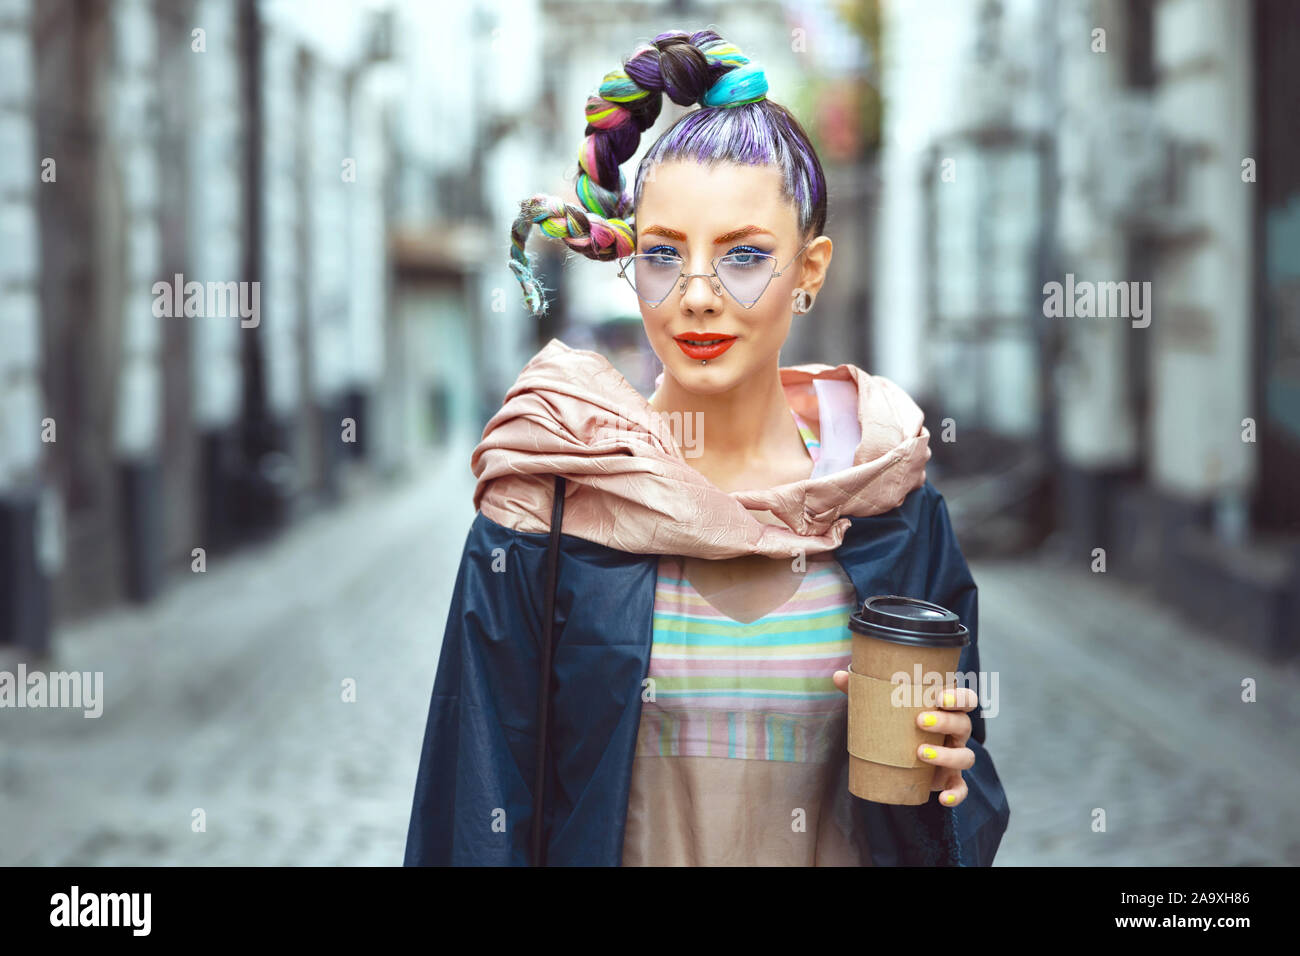 Cool funky hipster young woman with crazy avant garde look walking on city streets Stock Photo